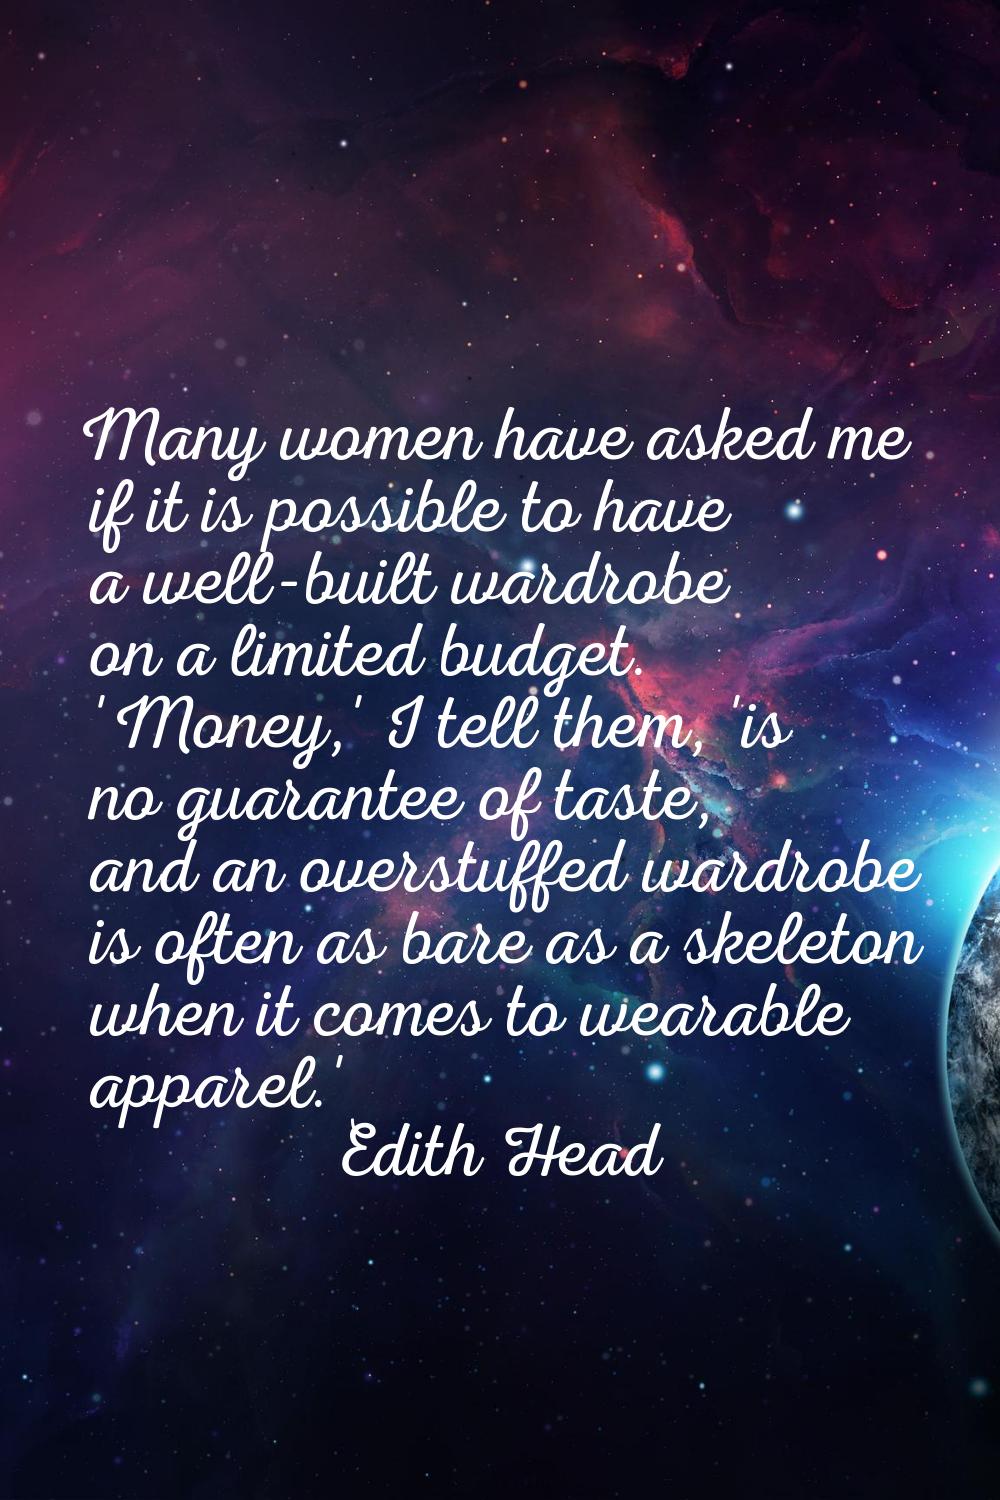 Many women have asked me if it is possible to have a well-built wardrobe on a limited budget. 'Mone